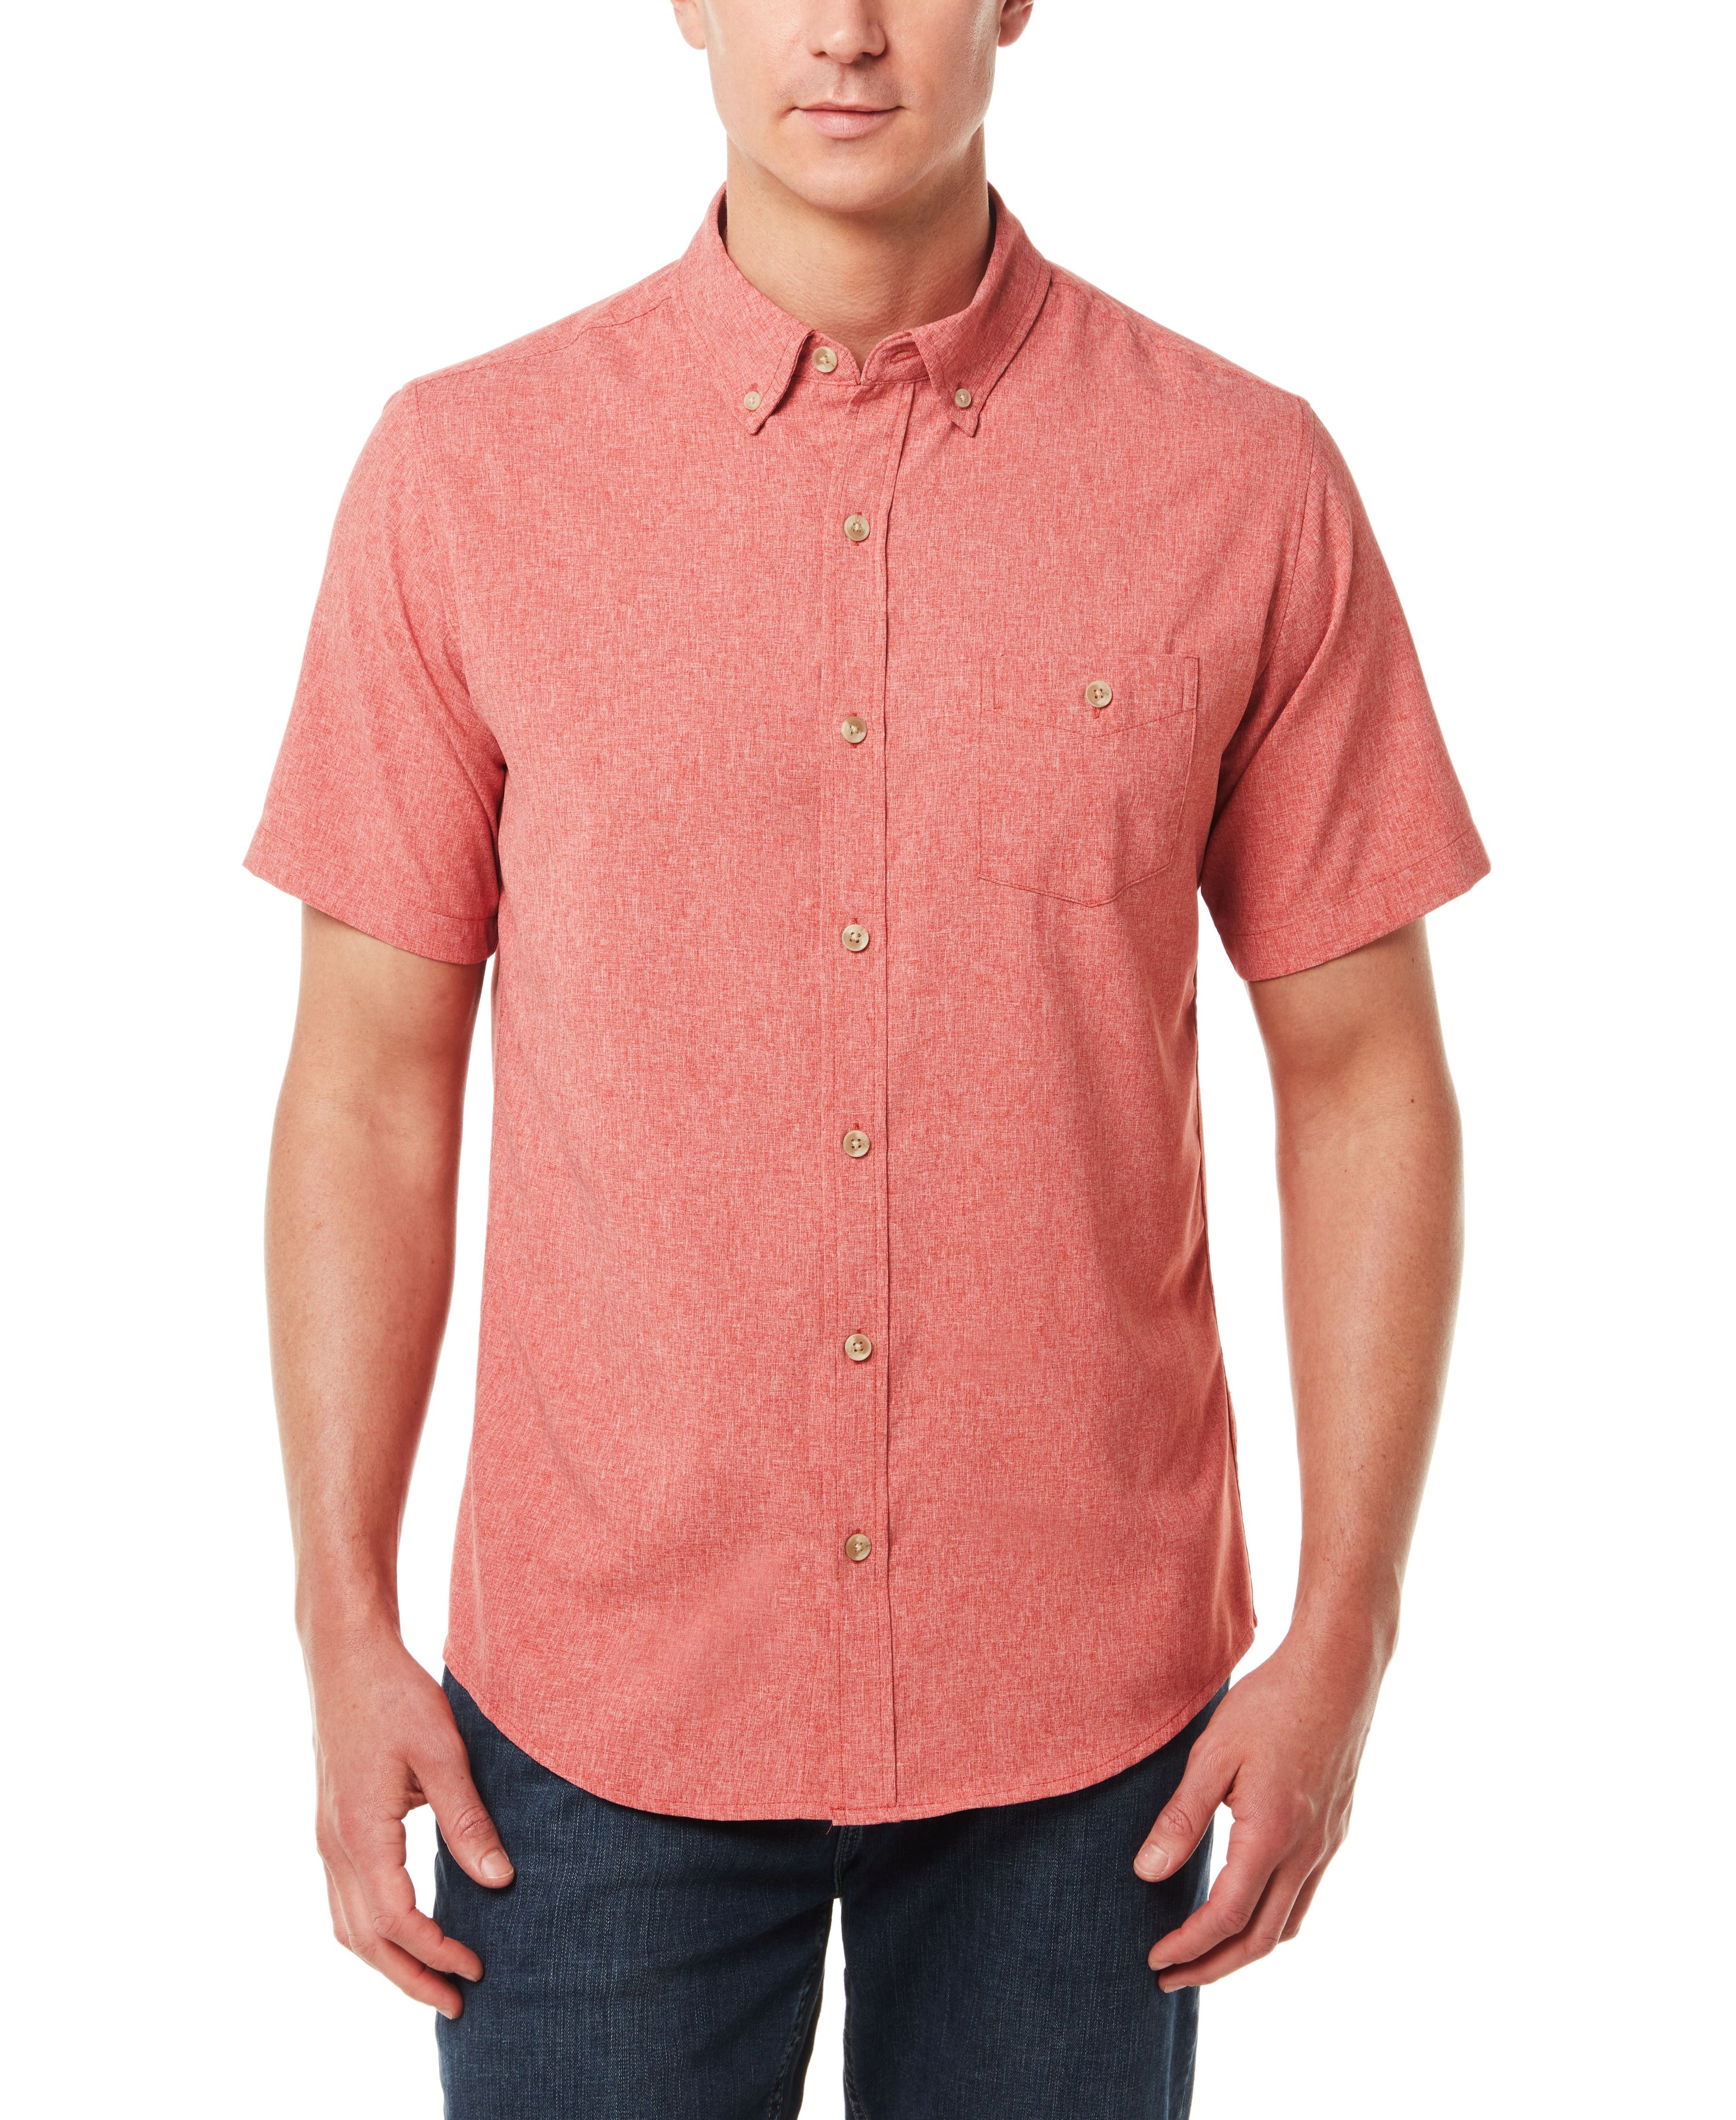 Performance Shirt in Cranberry